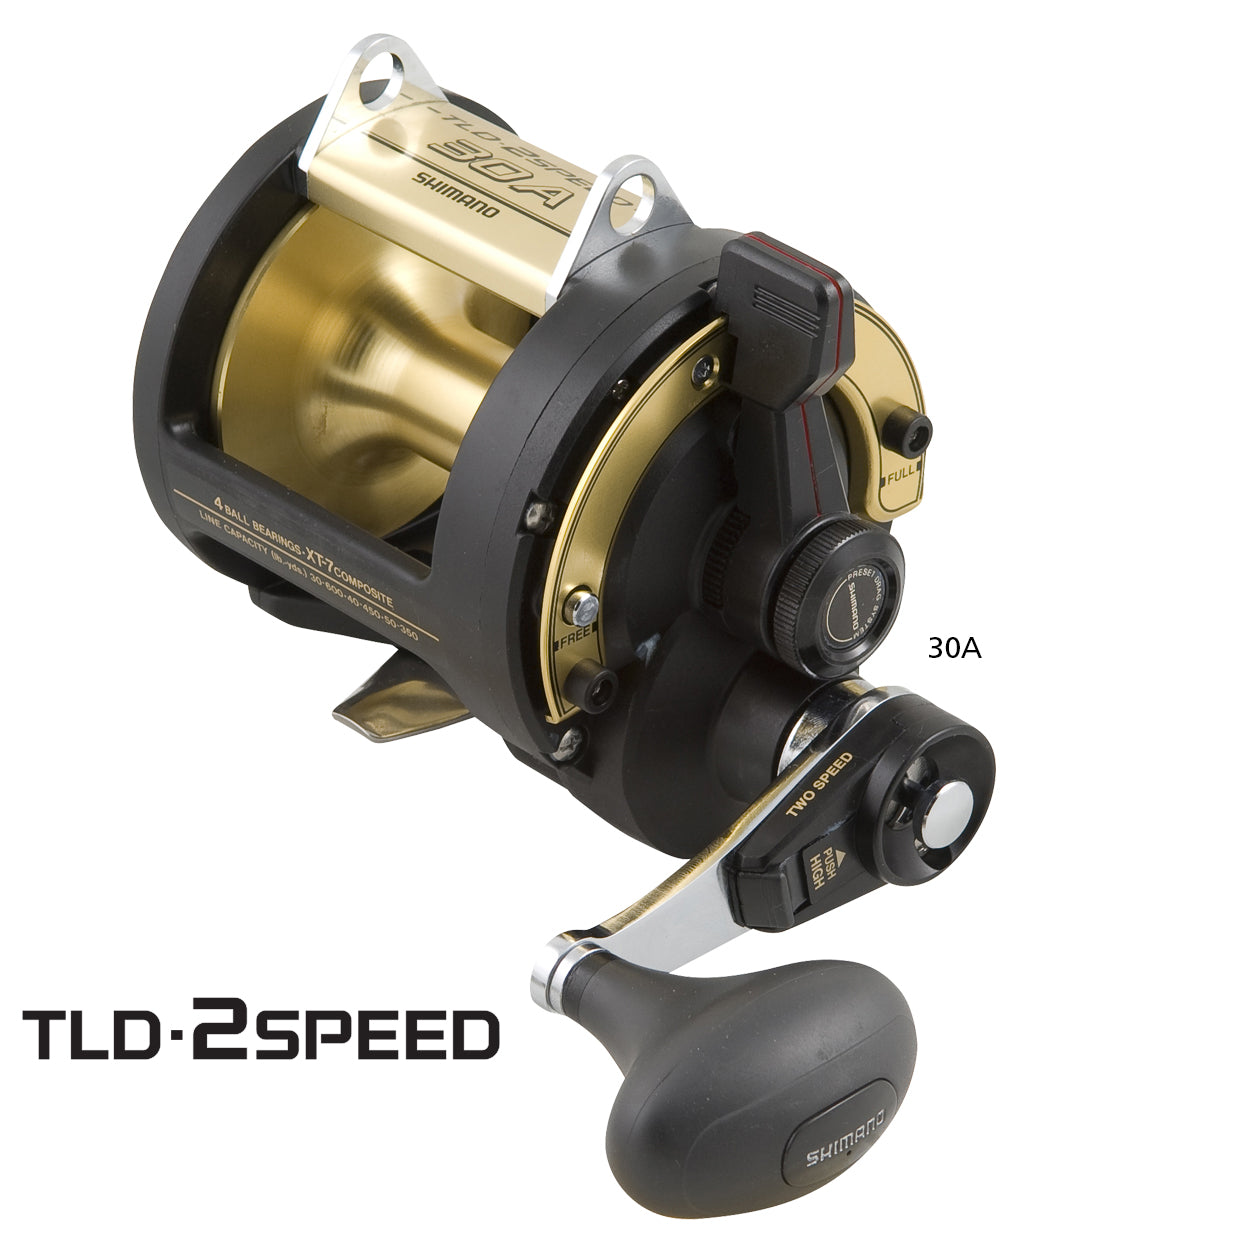 Shimano TLD 2-Speed 30A